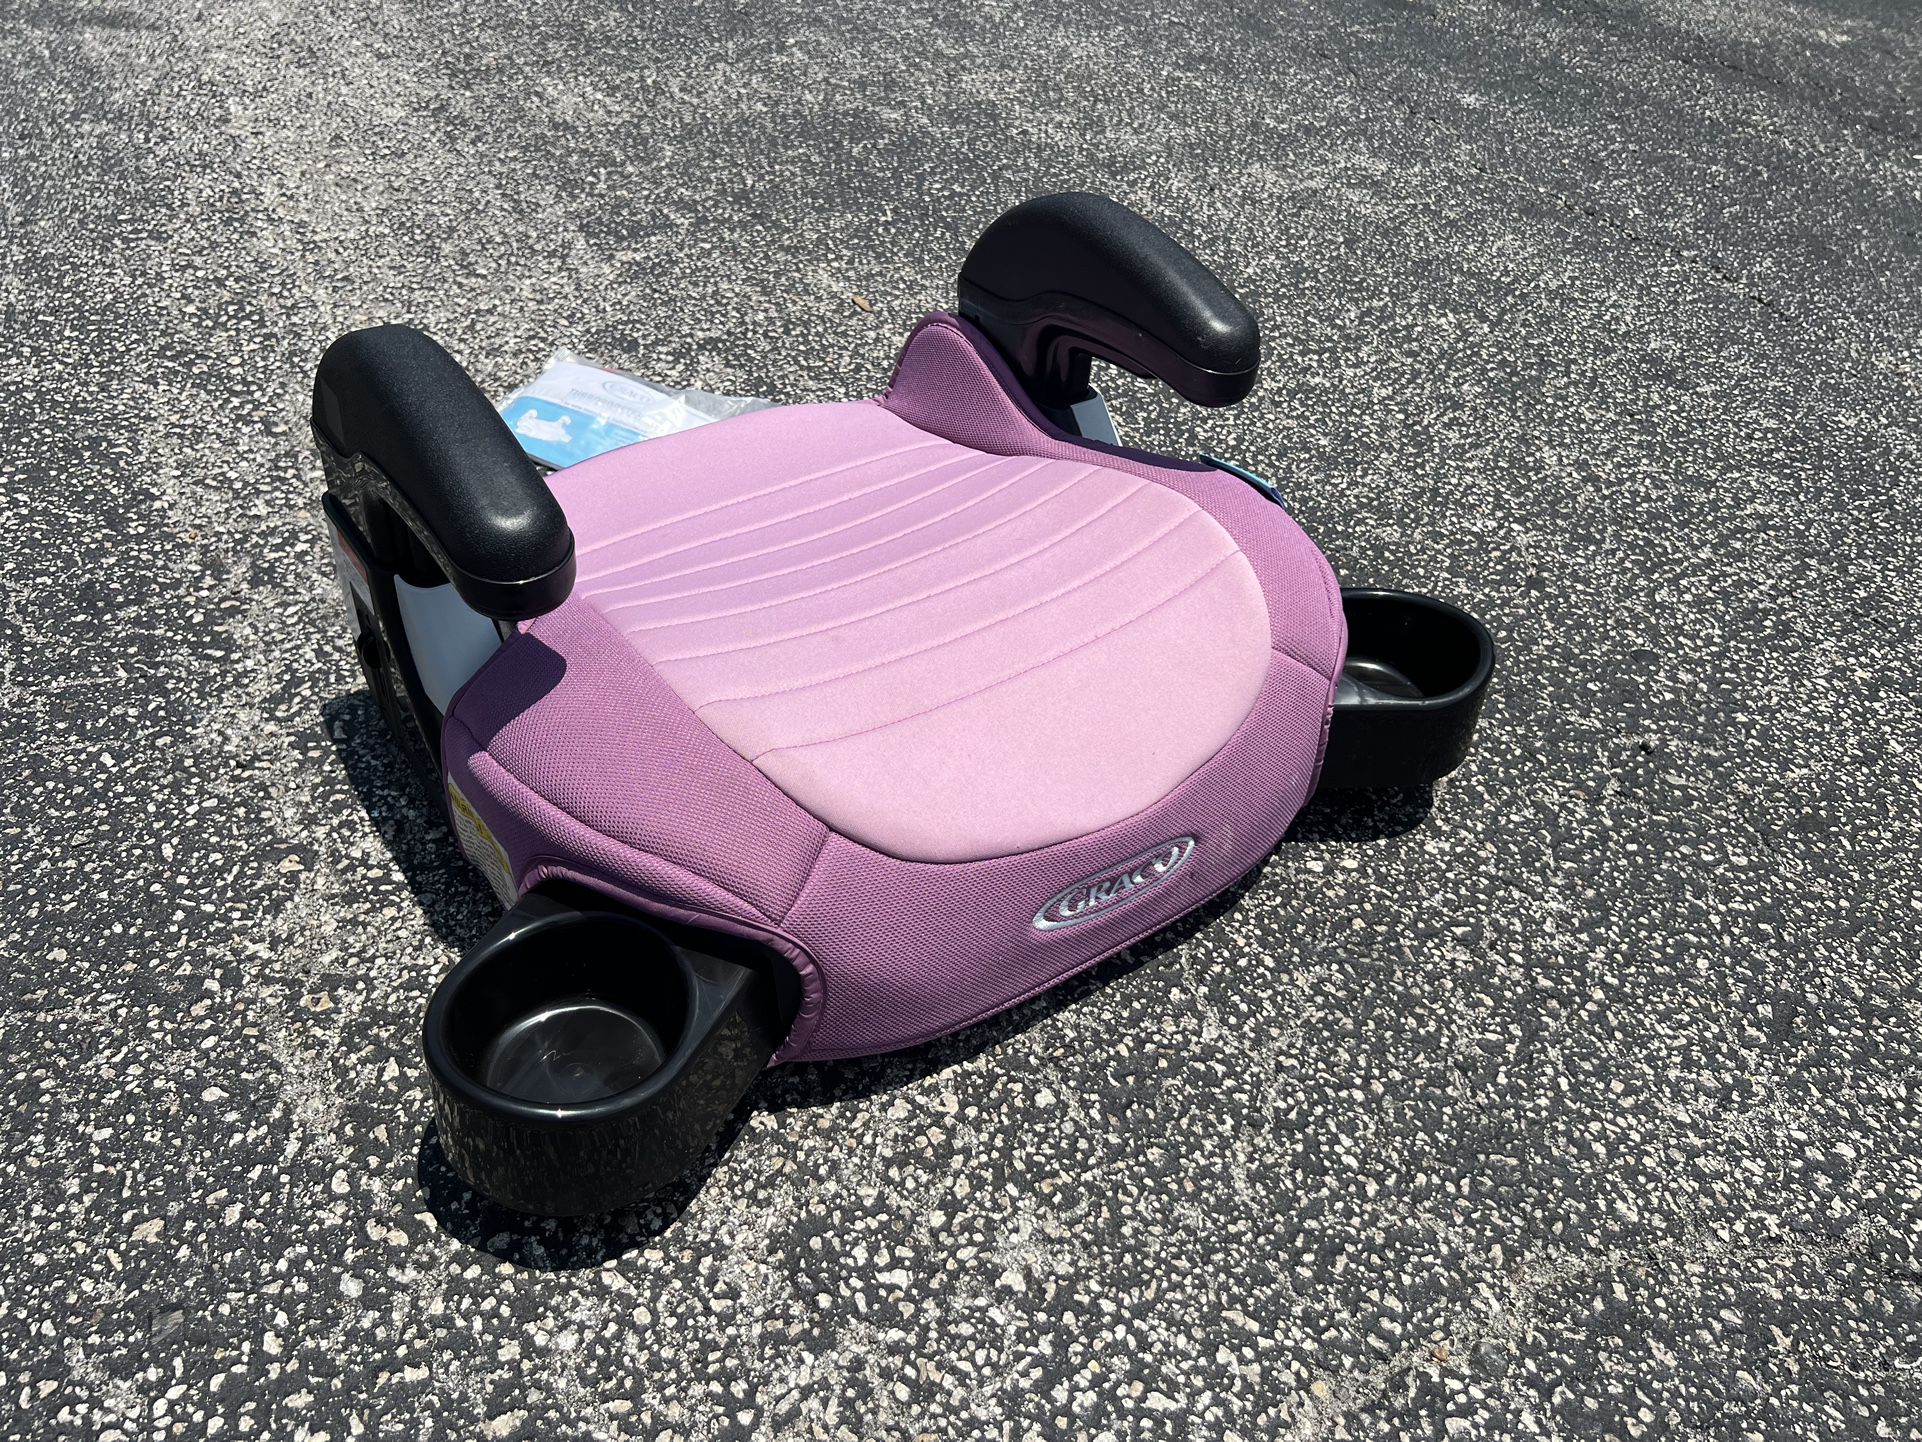 Graco Kid’s Booster Car Seat! In good condition! 